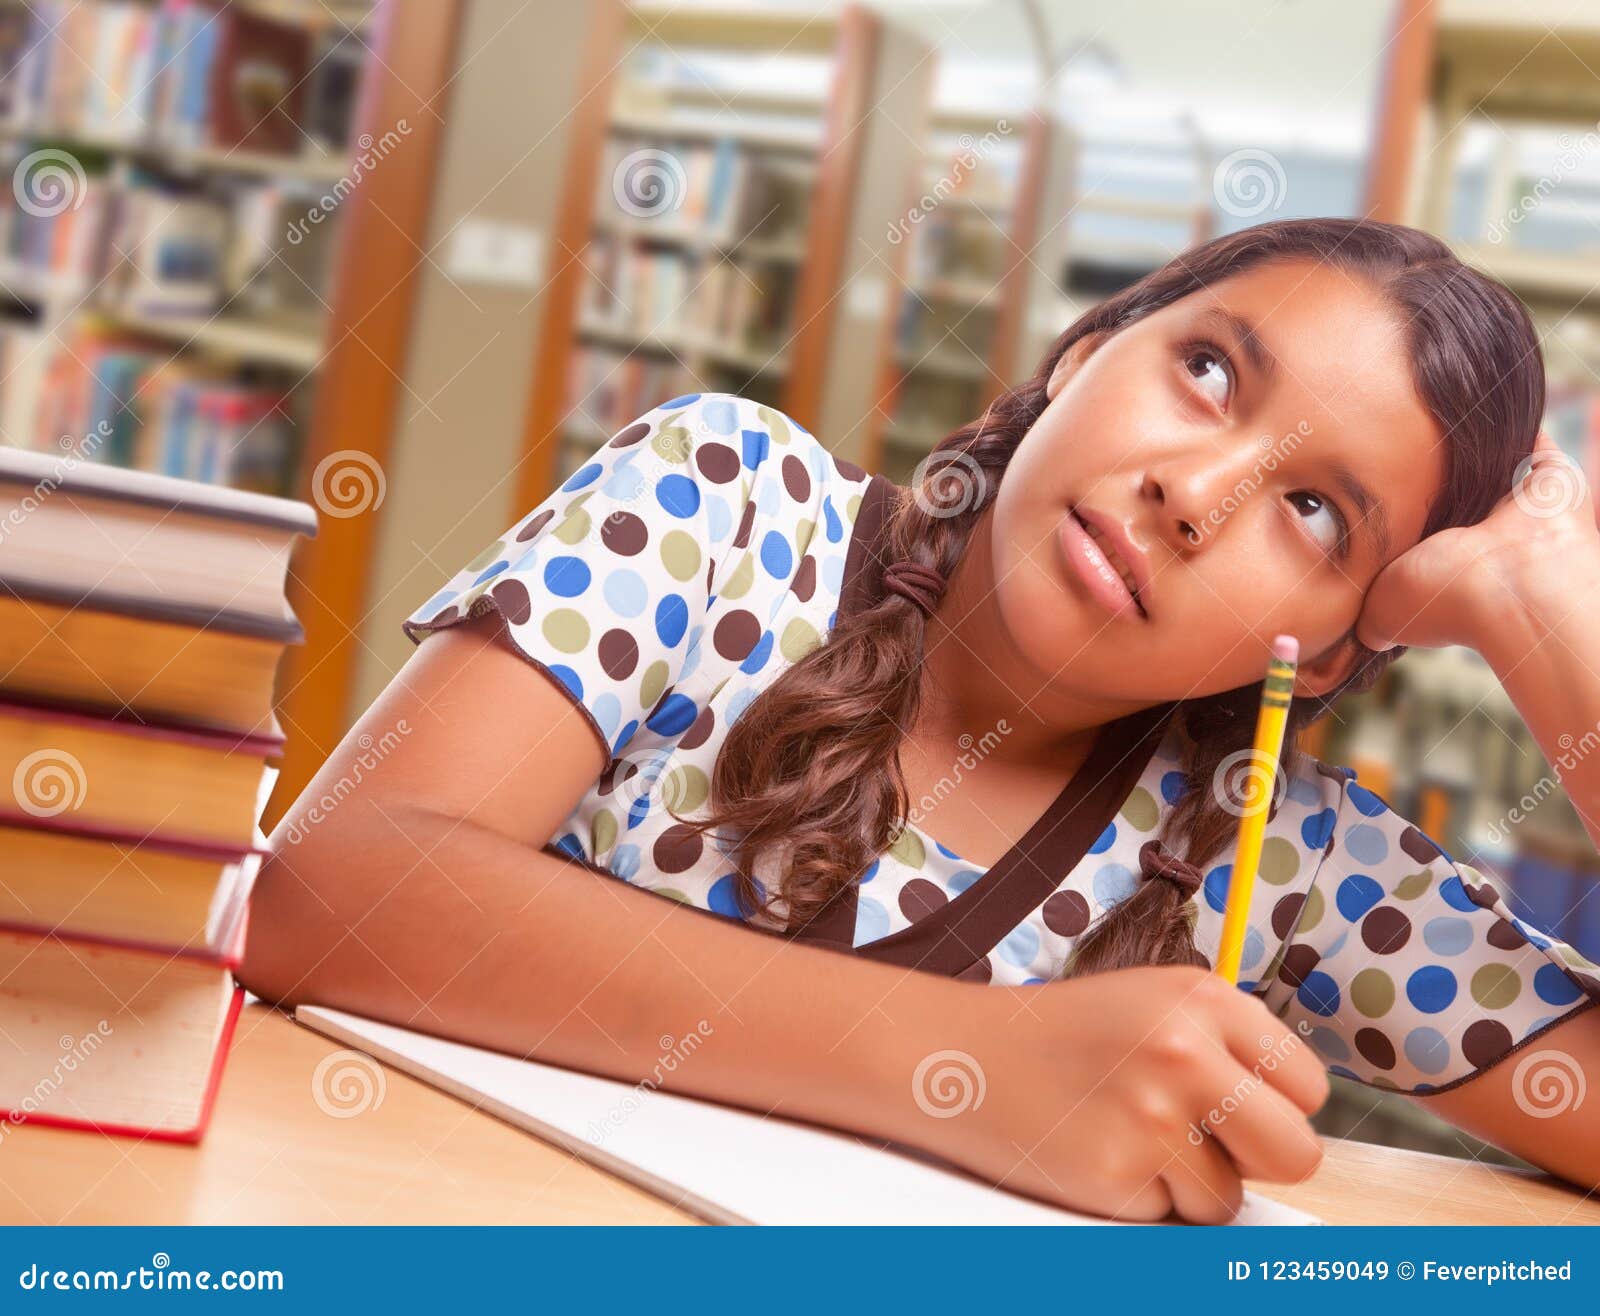 daydreaming hispanic girl student with pencil and books studying